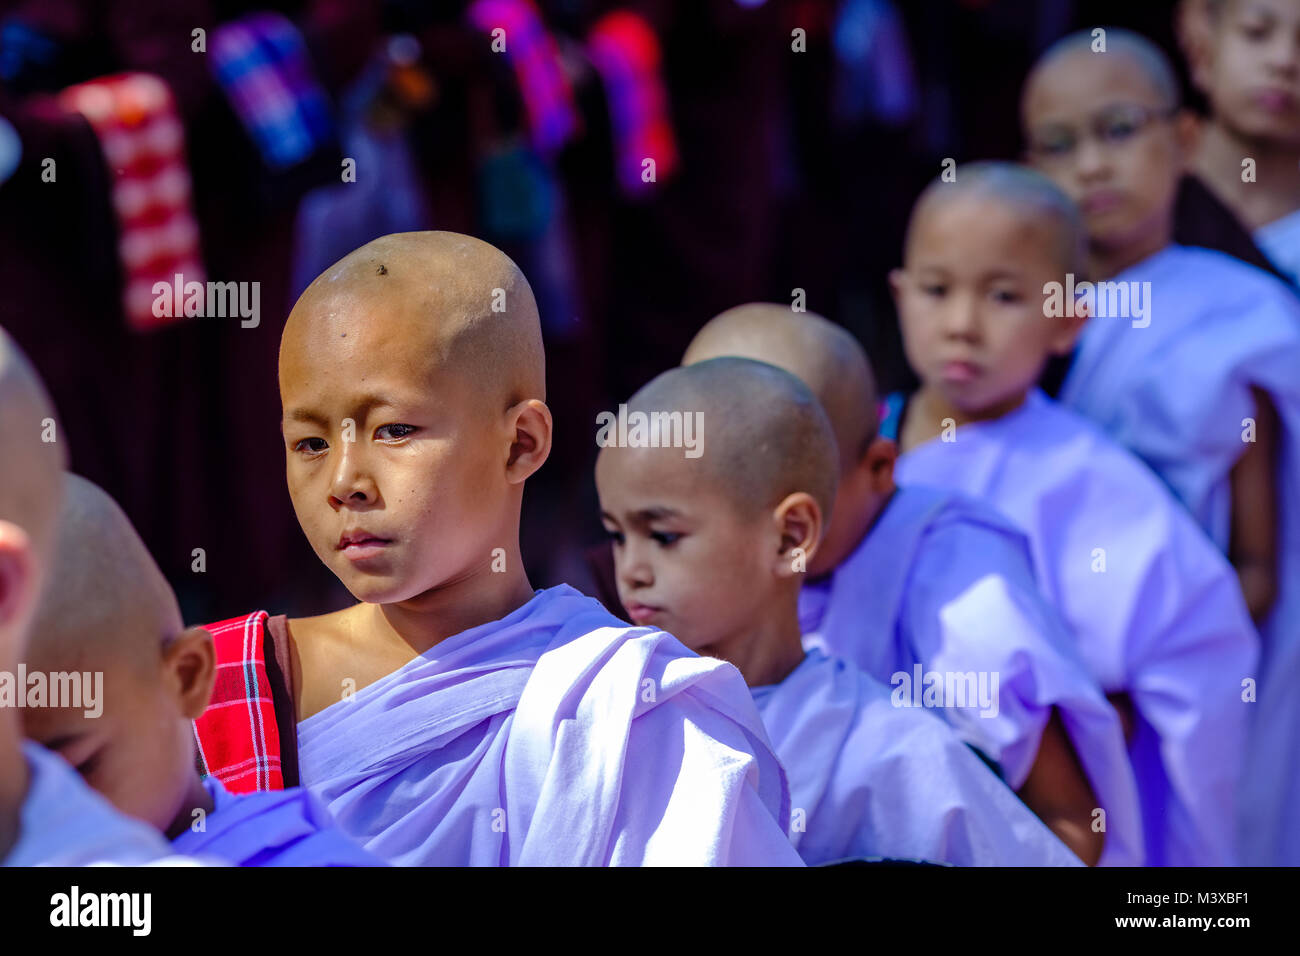 Shaved bold heads of young buddhist monks, queuing for food at Mahagandhayon Monastery Stock Photo